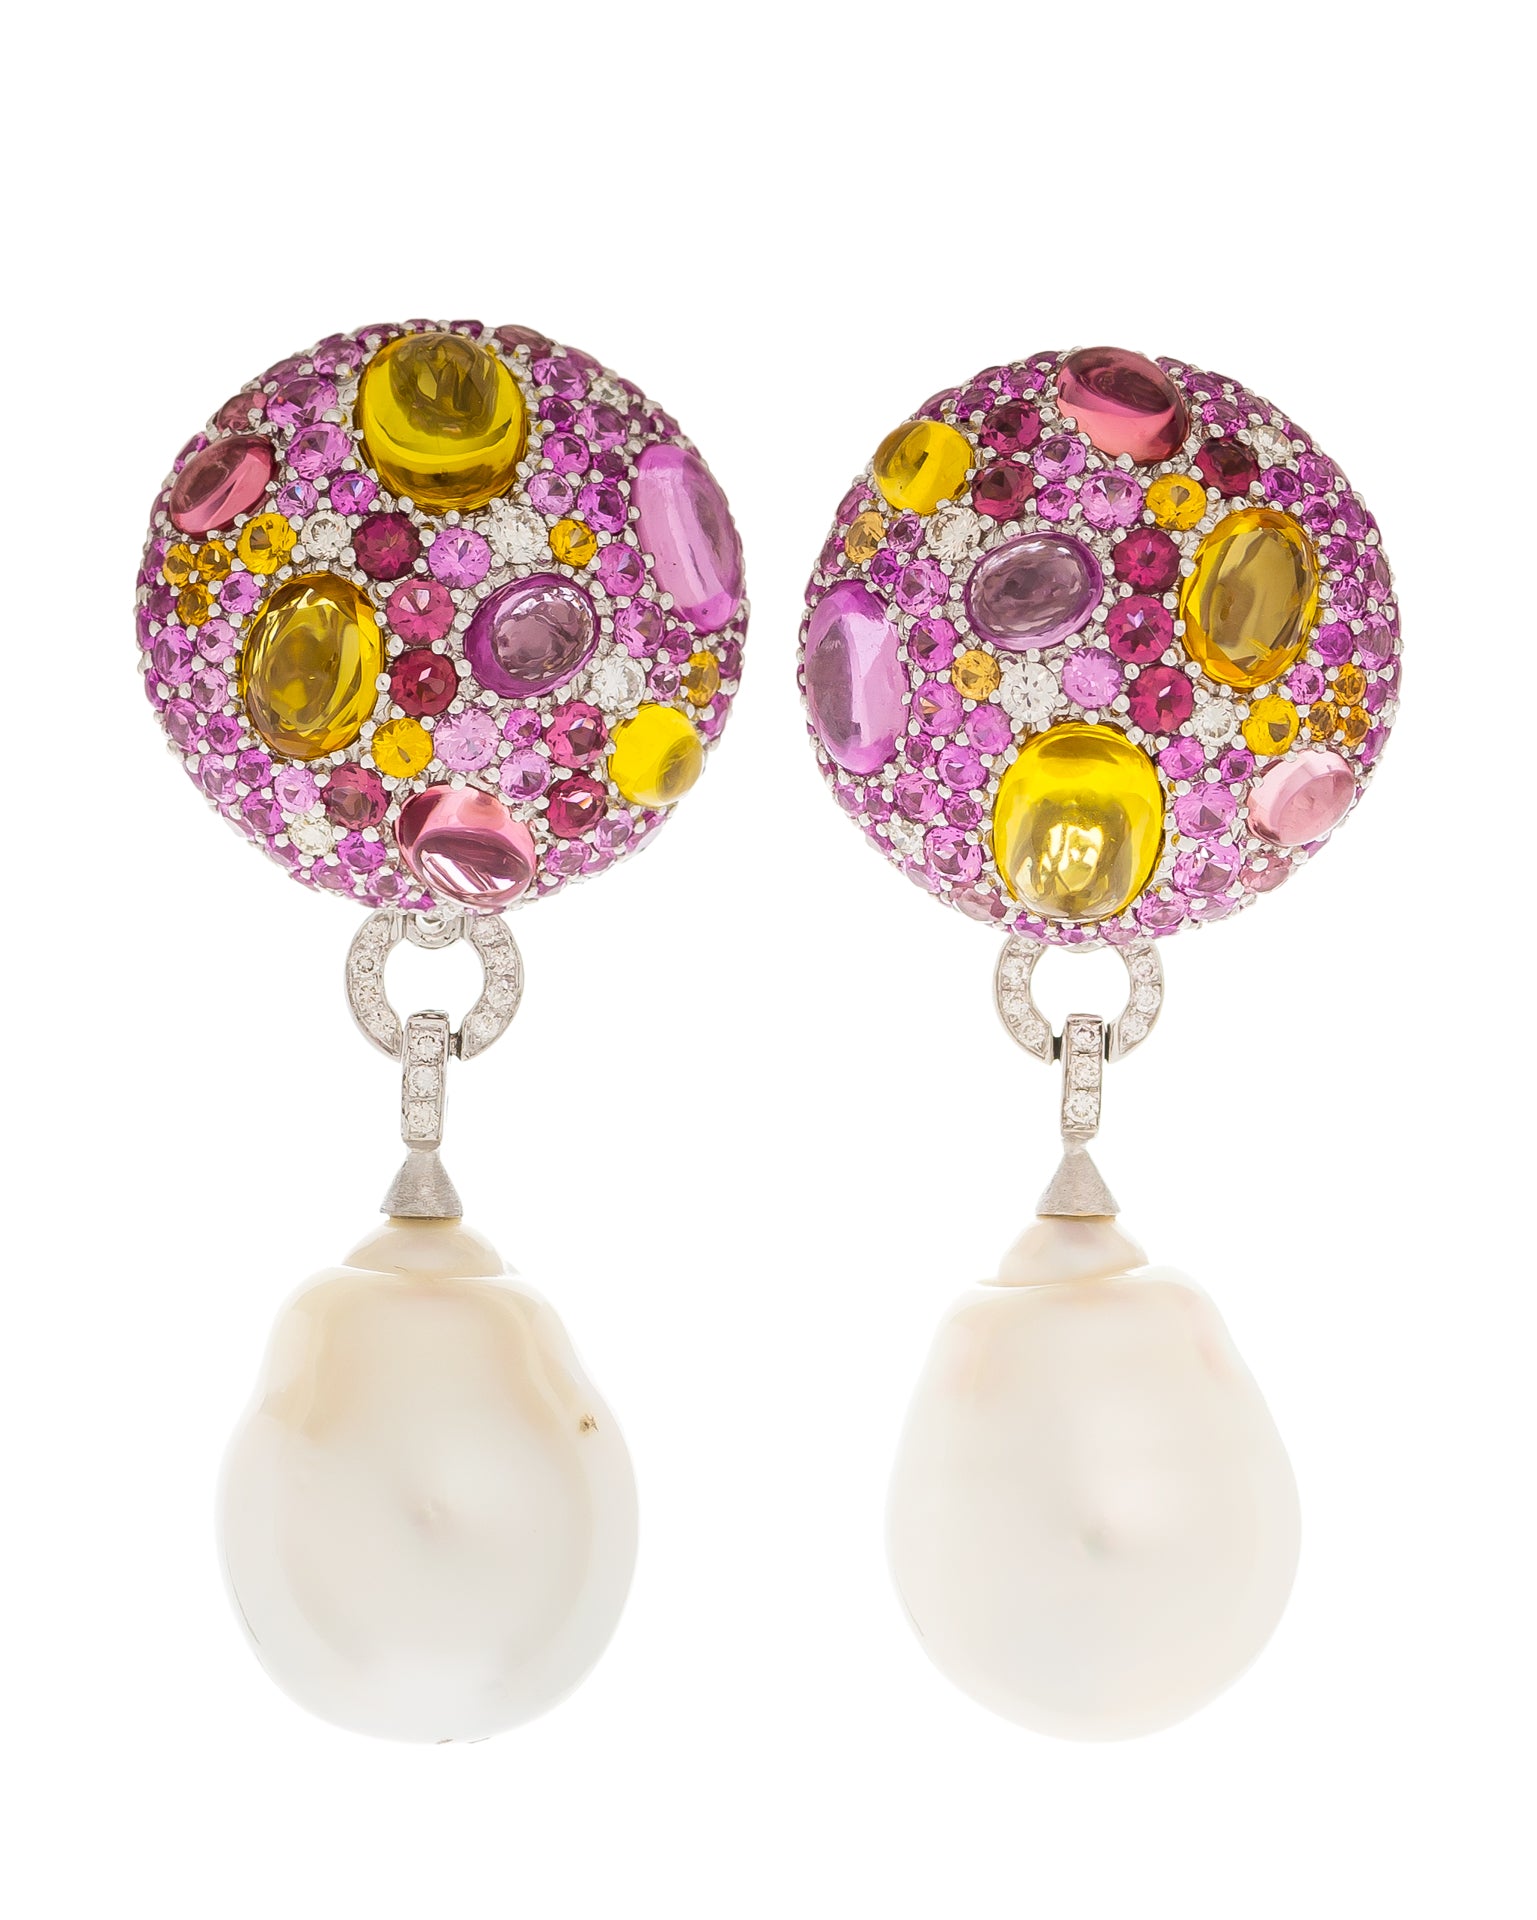 South Sea pearl pink cookie drop earrings enhanced with a myriad of gemstones and diamonds, crafted in 18 karat white gold